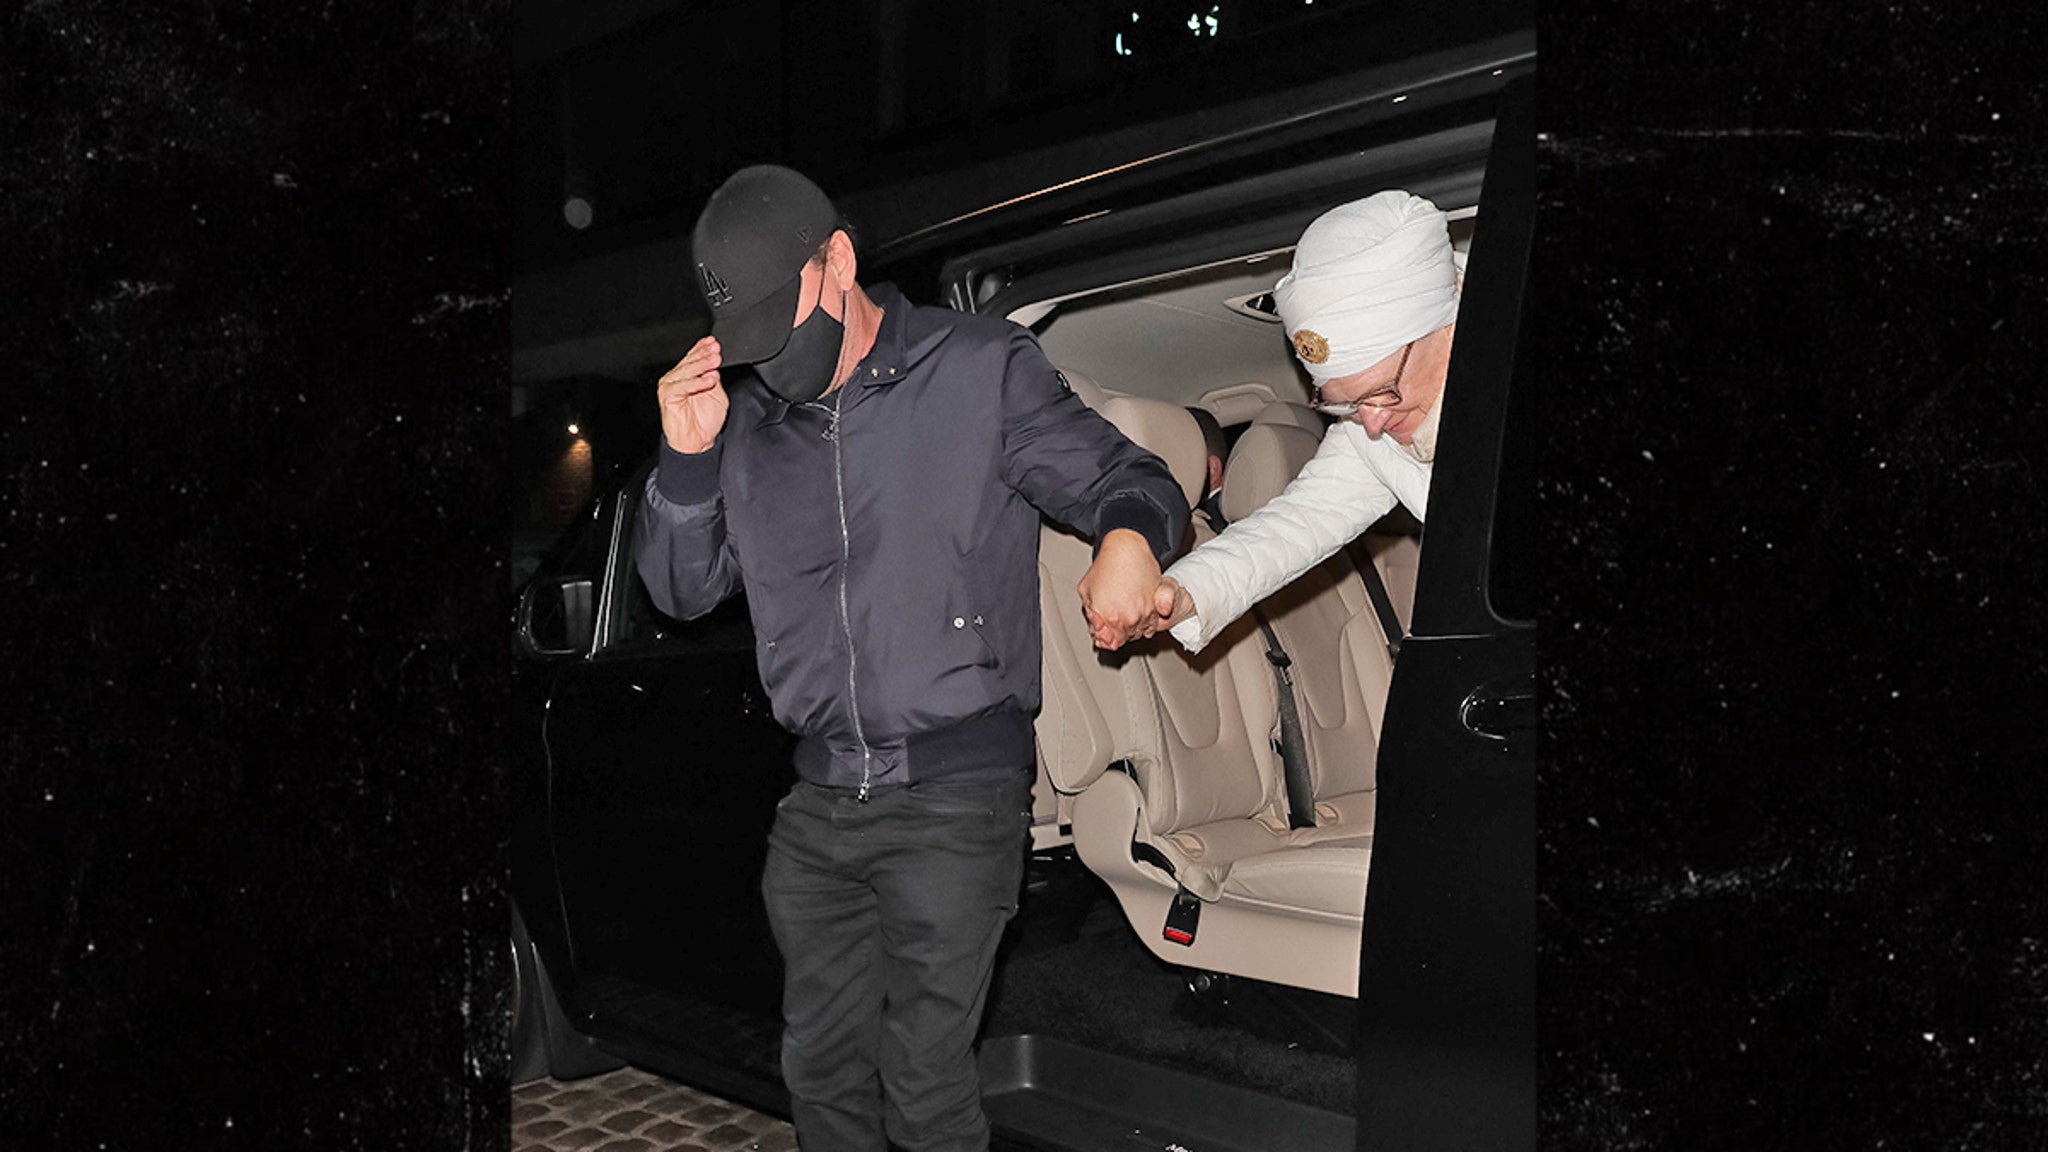 Leonardo DiCaprio and Gigi Hadid have dinner with their parents in London